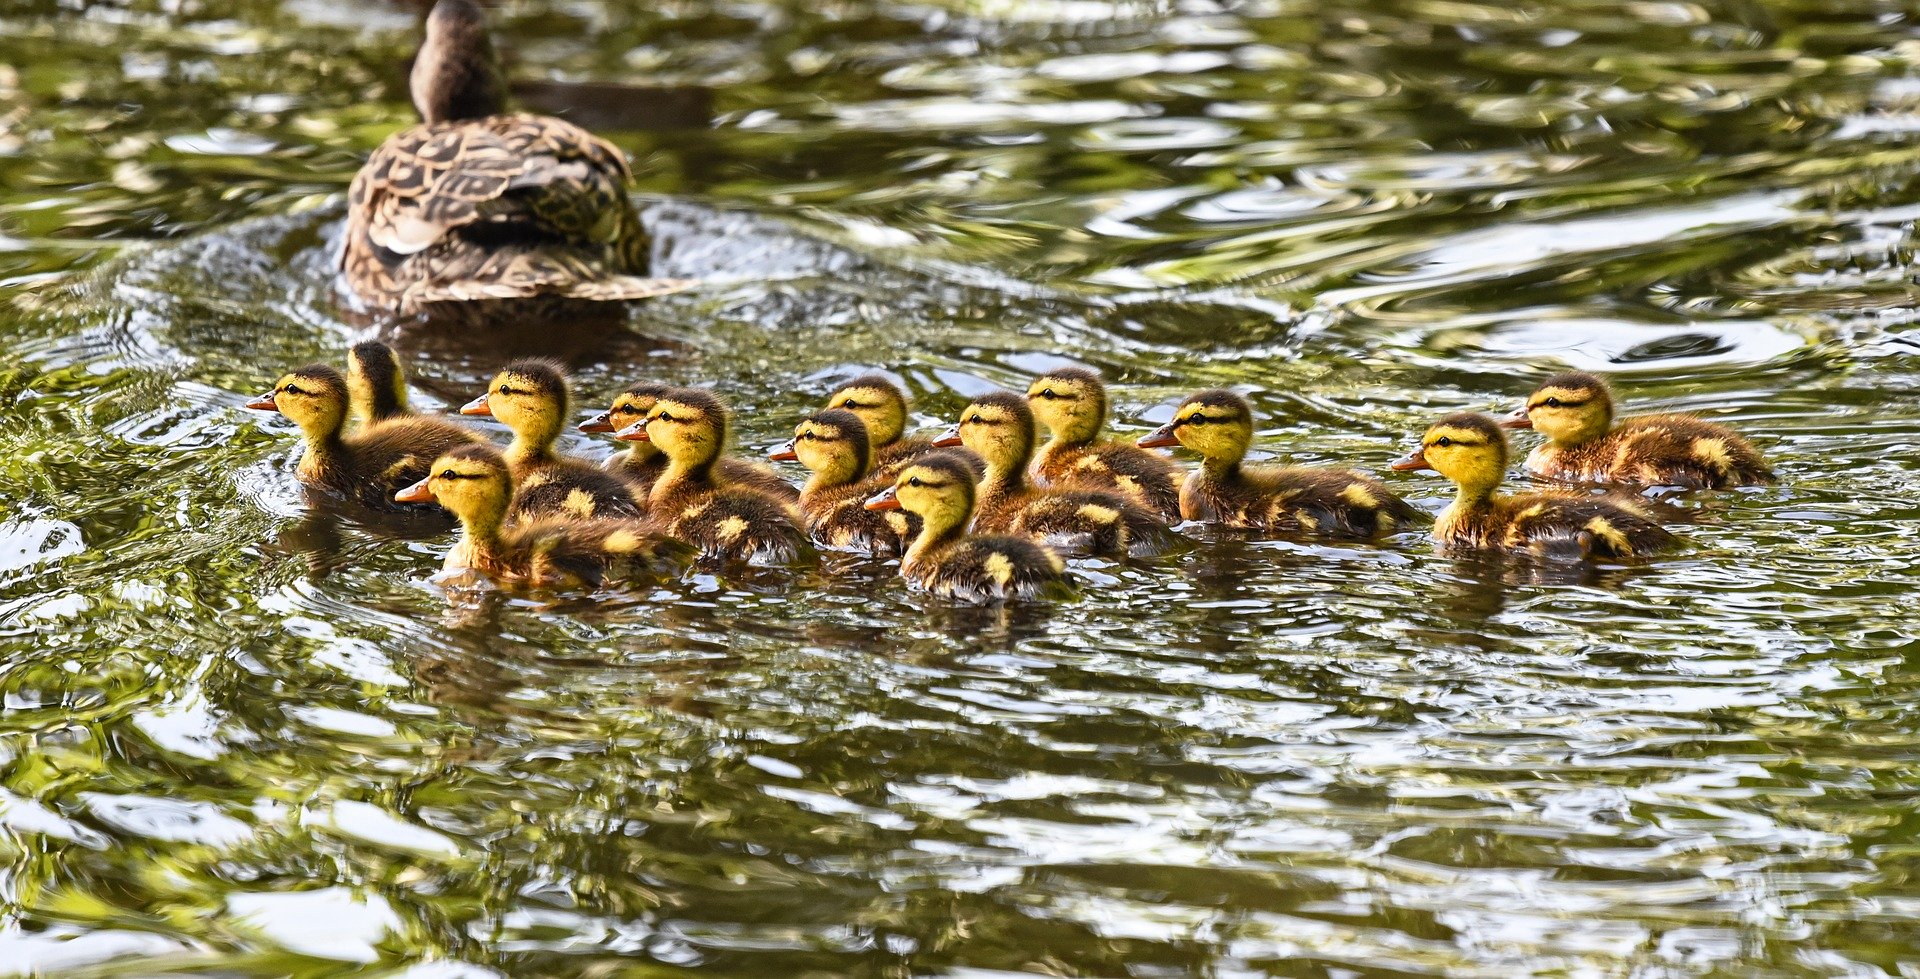 Ducklings swimming in a pond with mom